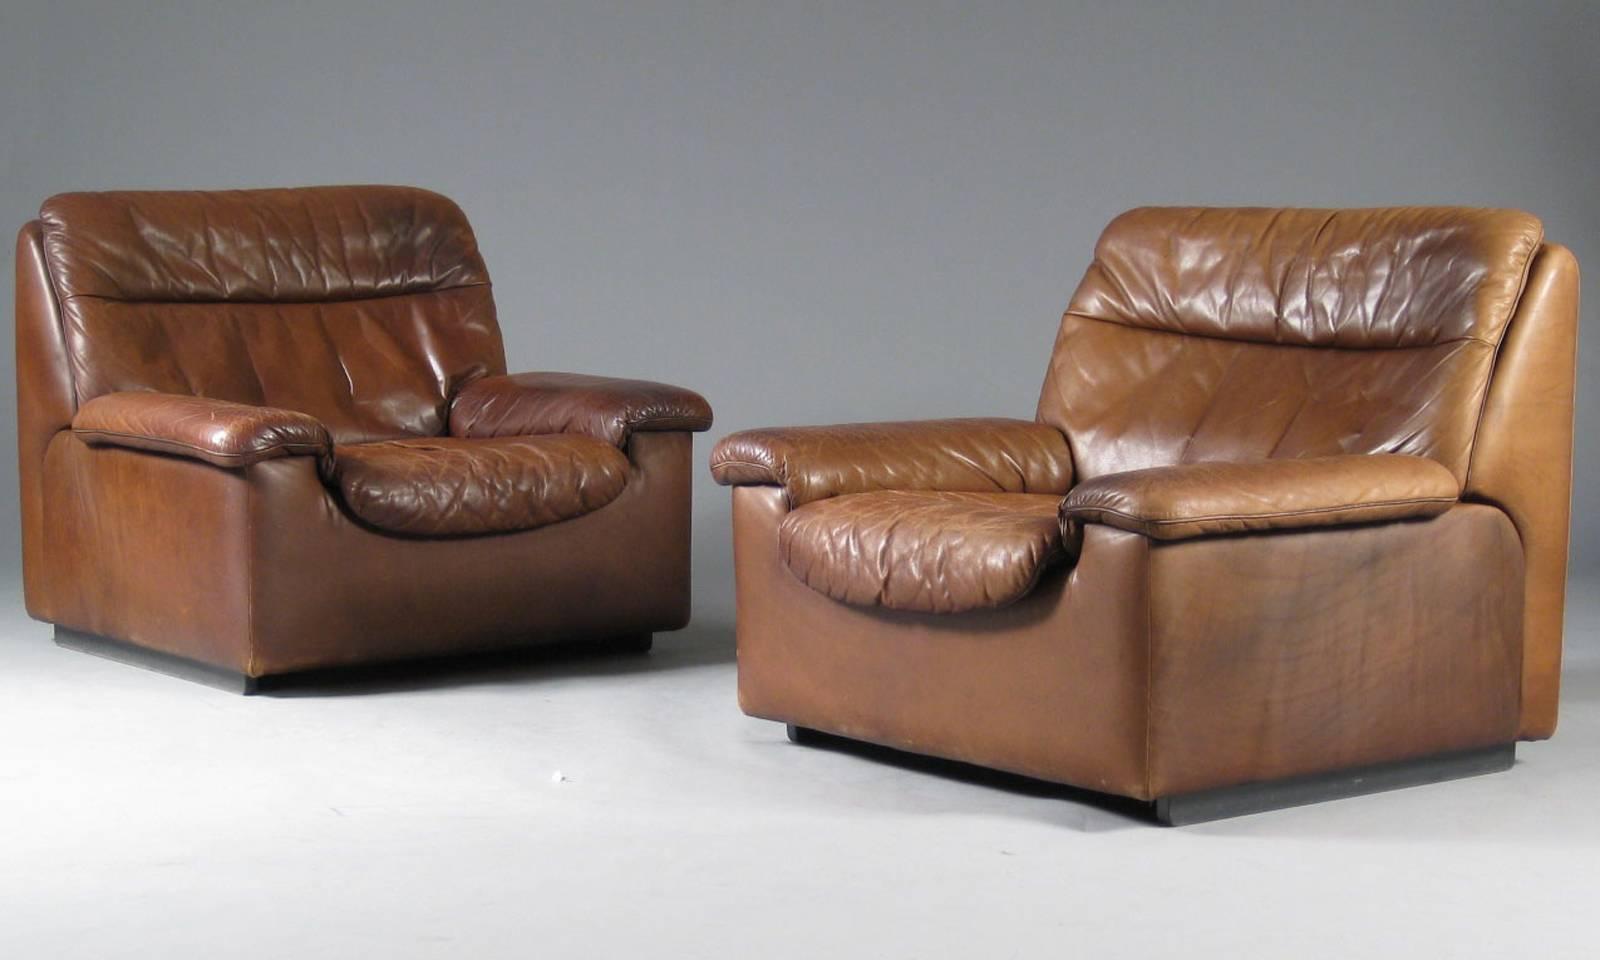 Pair of 1970s Leather Club Chairs and Ottoman by De Sede of Switzerland (Moderne der Mitte des Jahrhunderts)